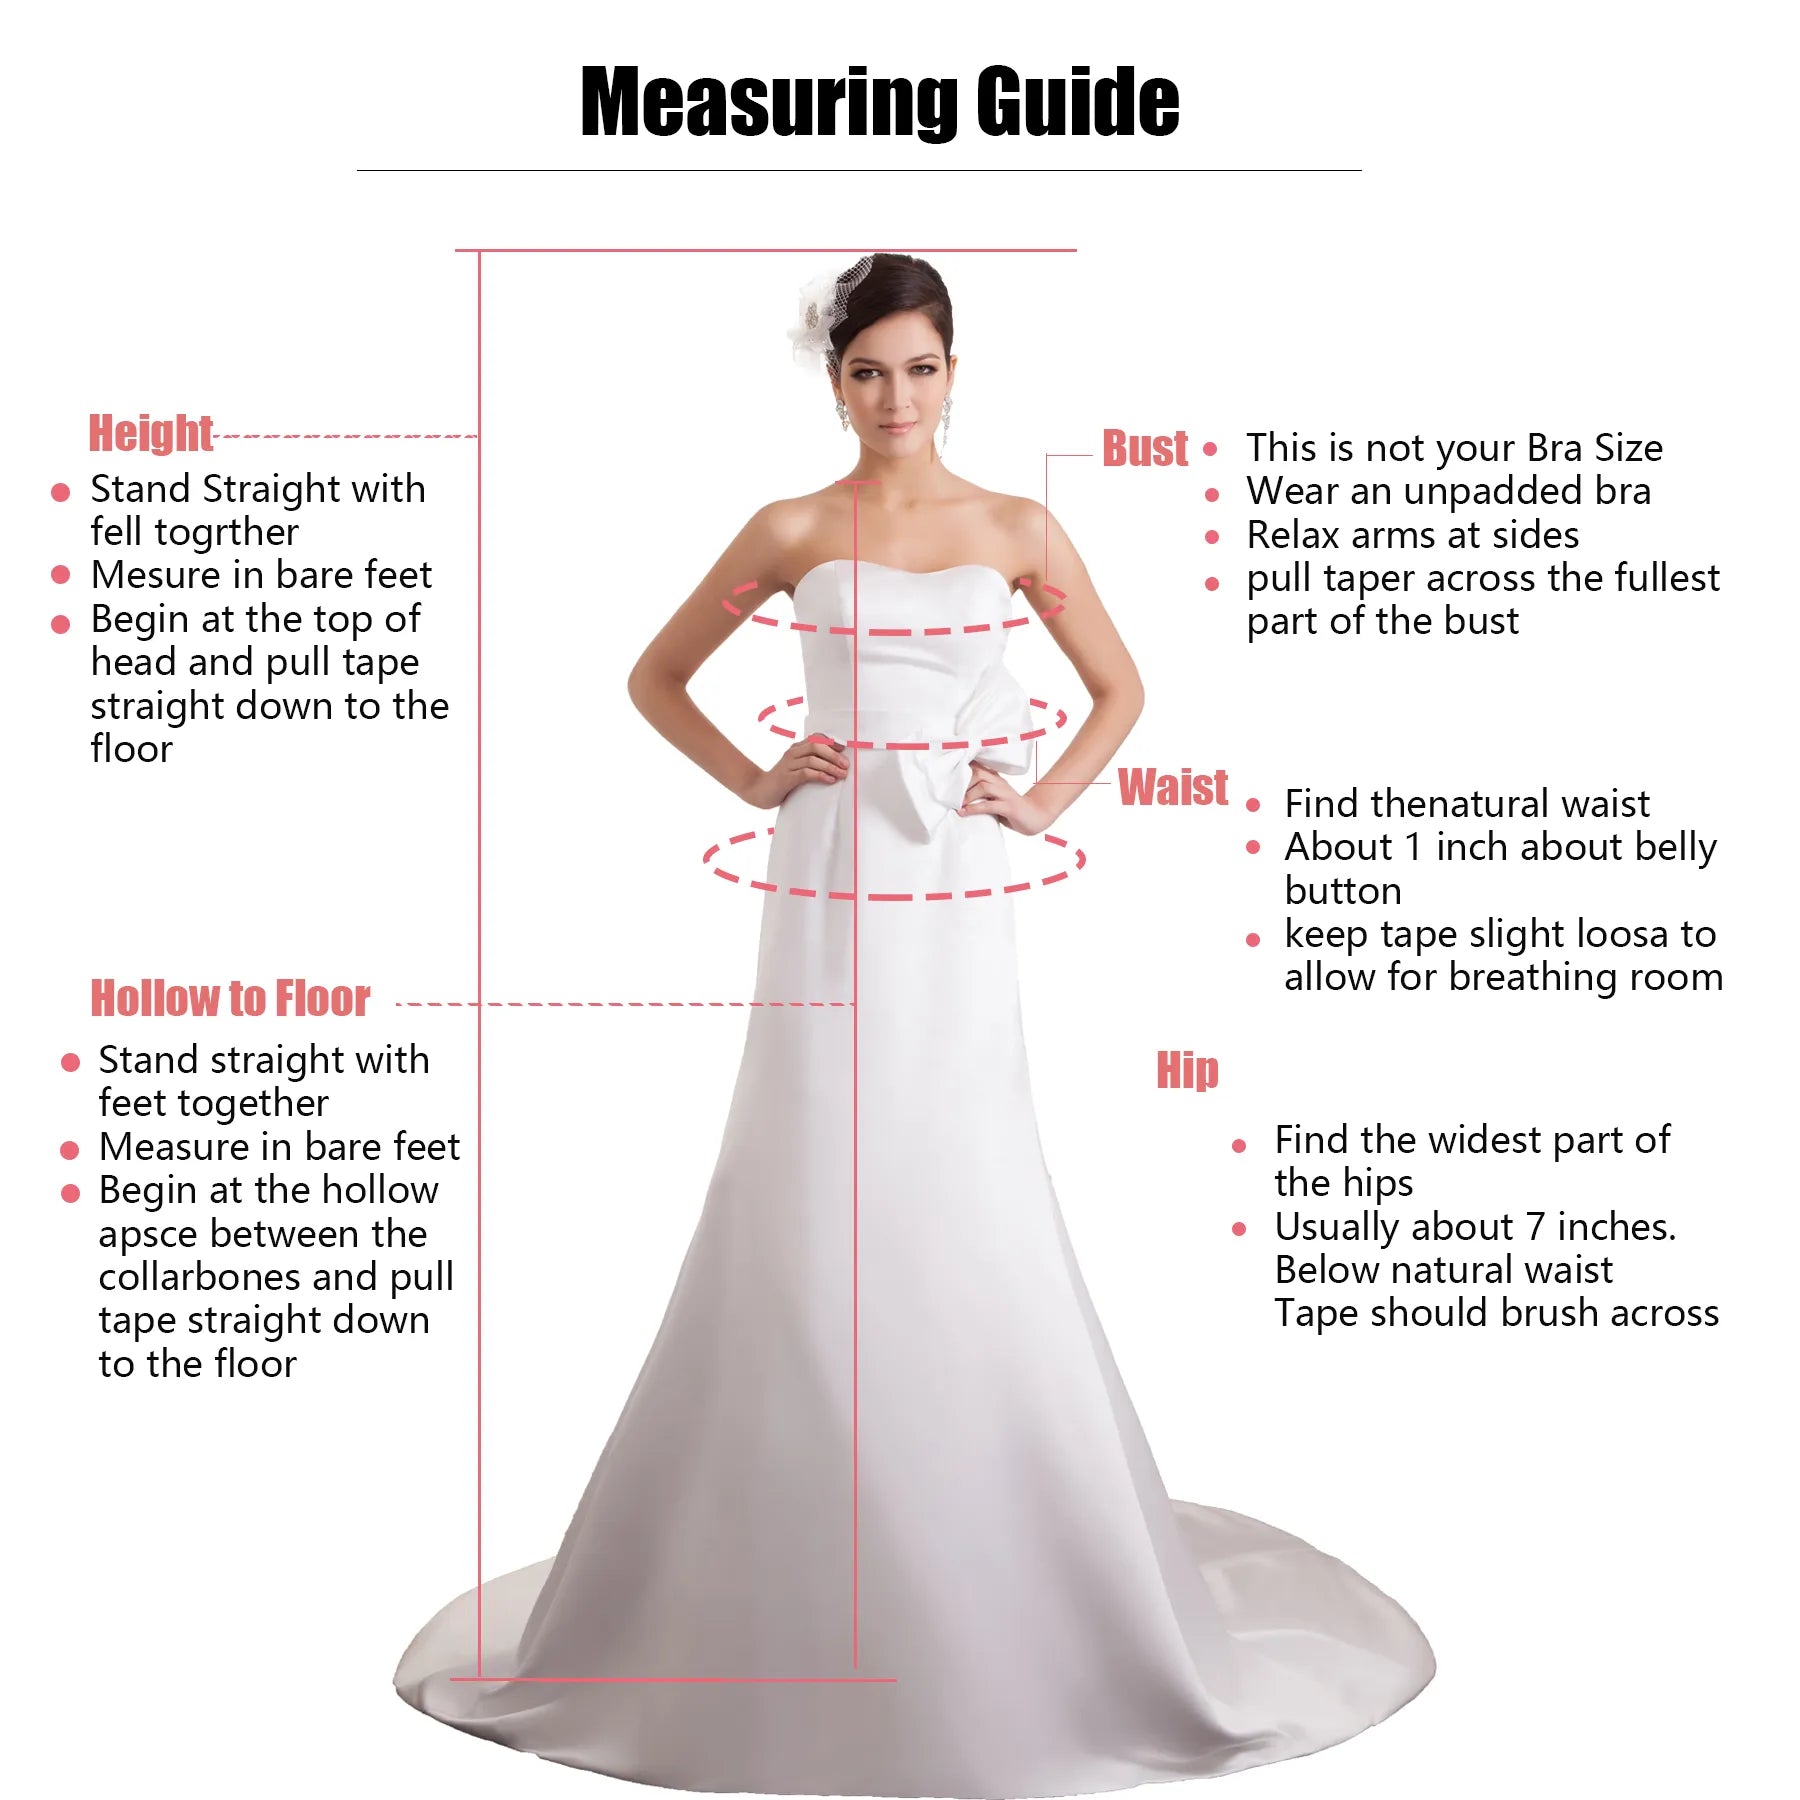 Luxury Women's Elegant Bridal Dresses High Collar Sparkling Beads String Feather Princess miniskirt Wedding Gowns Sexy Backless